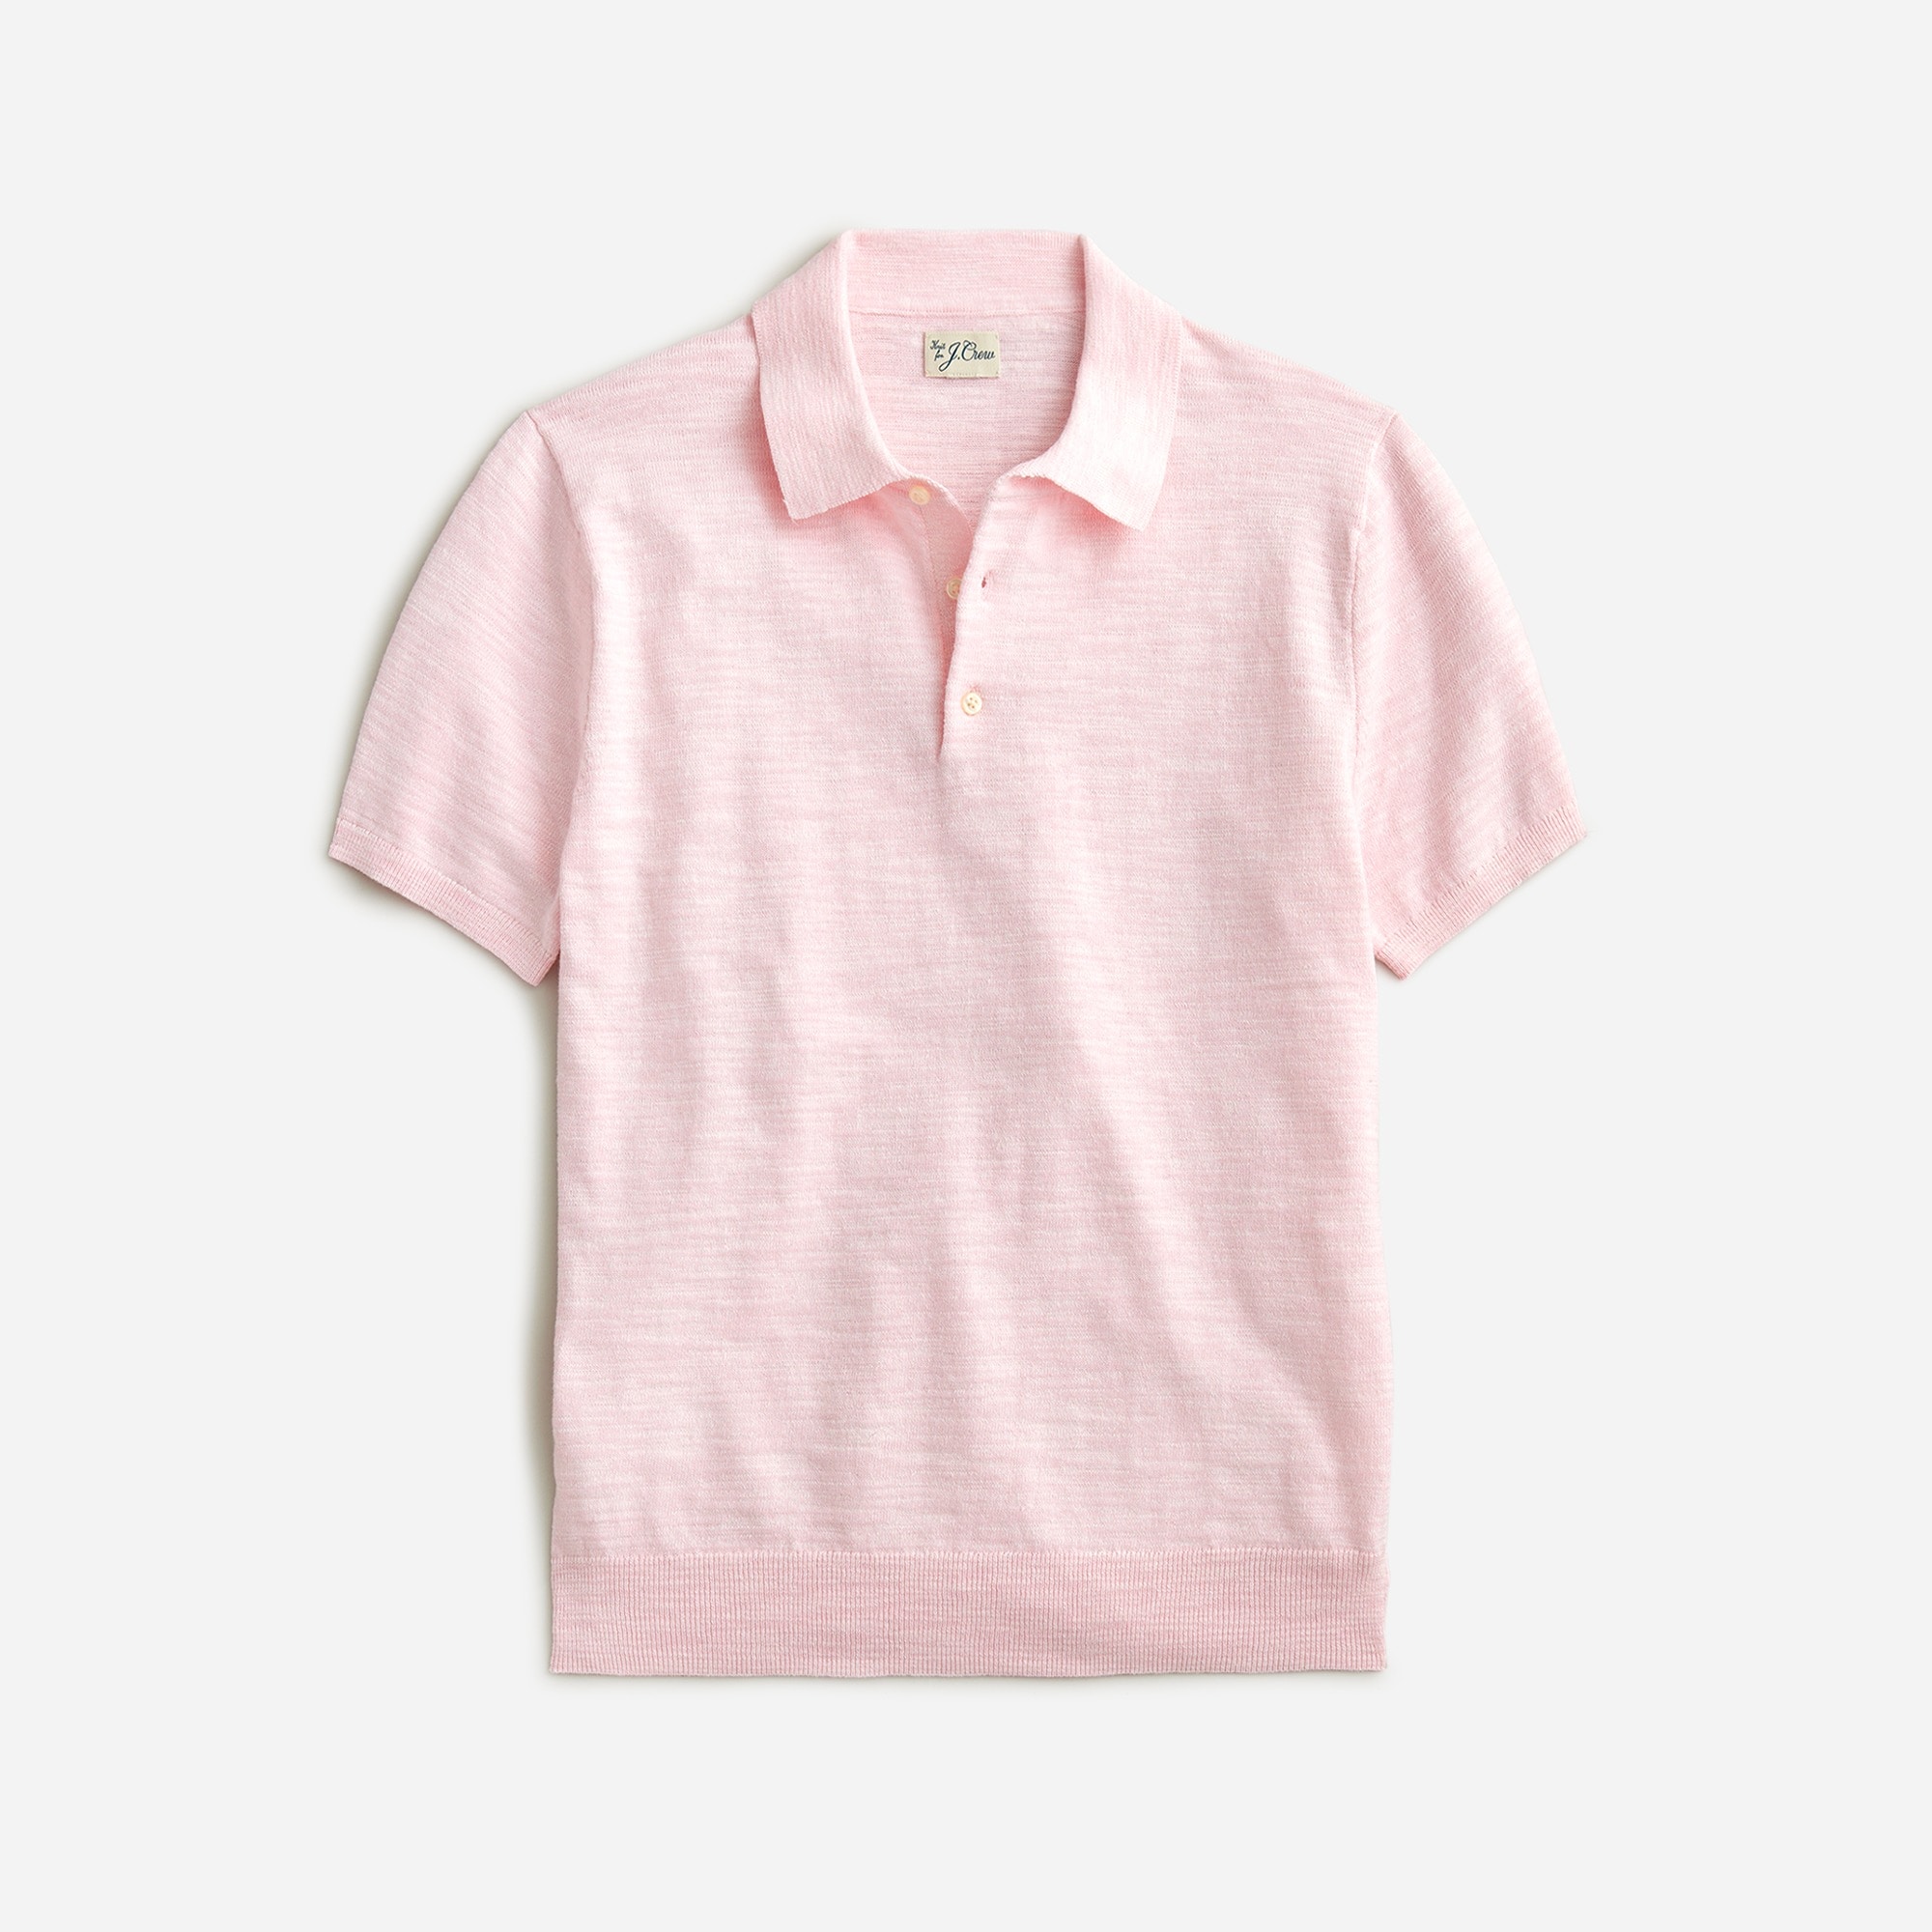  Short-sleeve cotton-blend sweater-polo